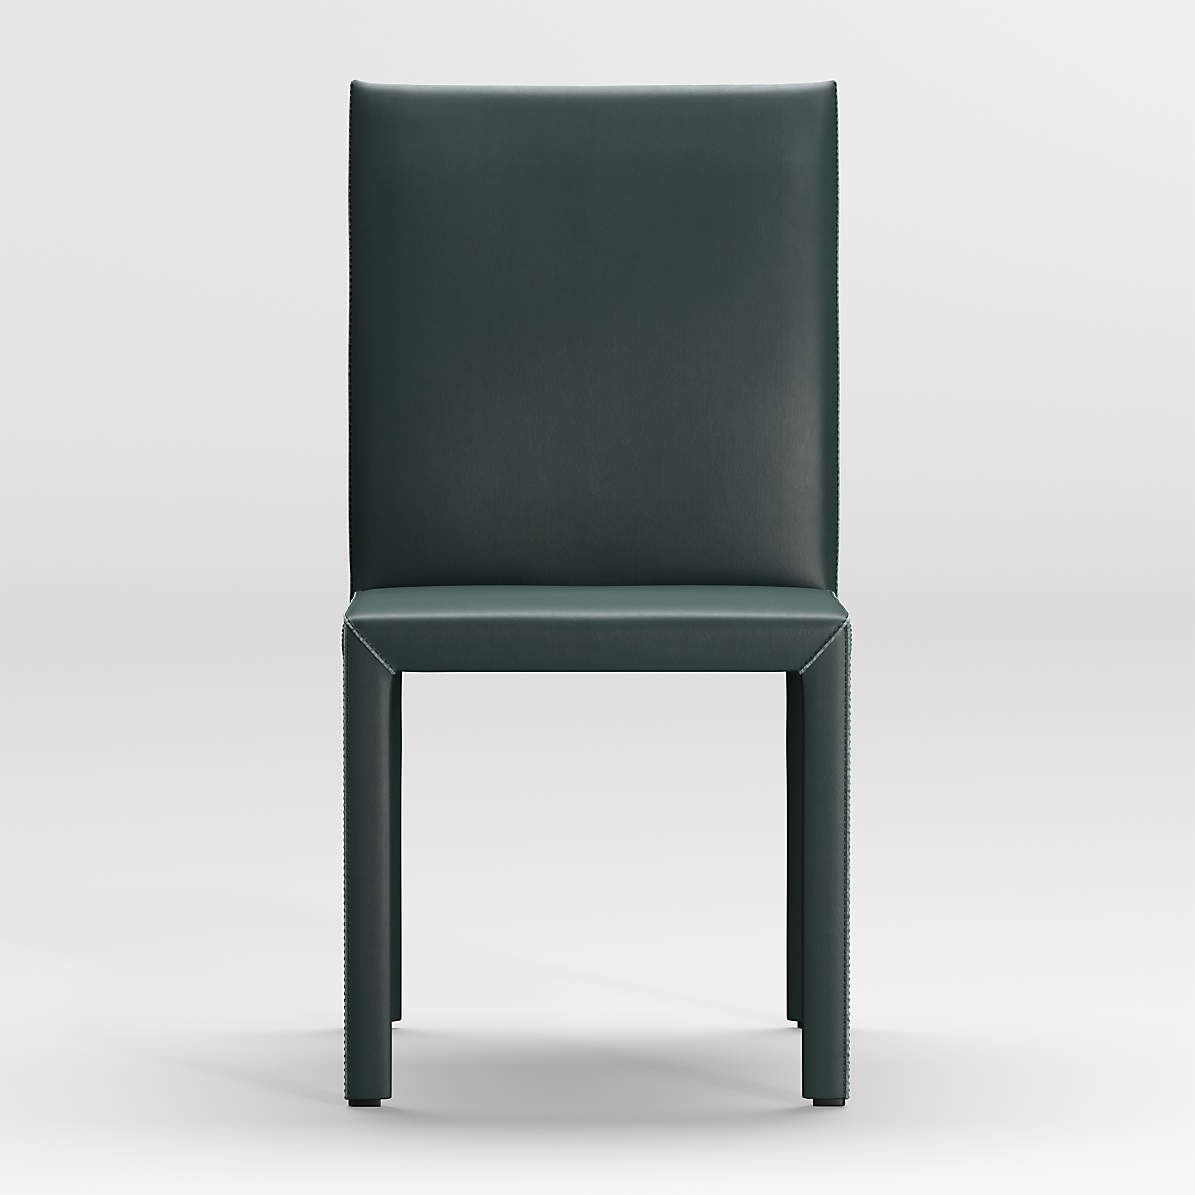 Folio Dark Green Top Grain Leather Dining Chair Reviews Crate And Barrel